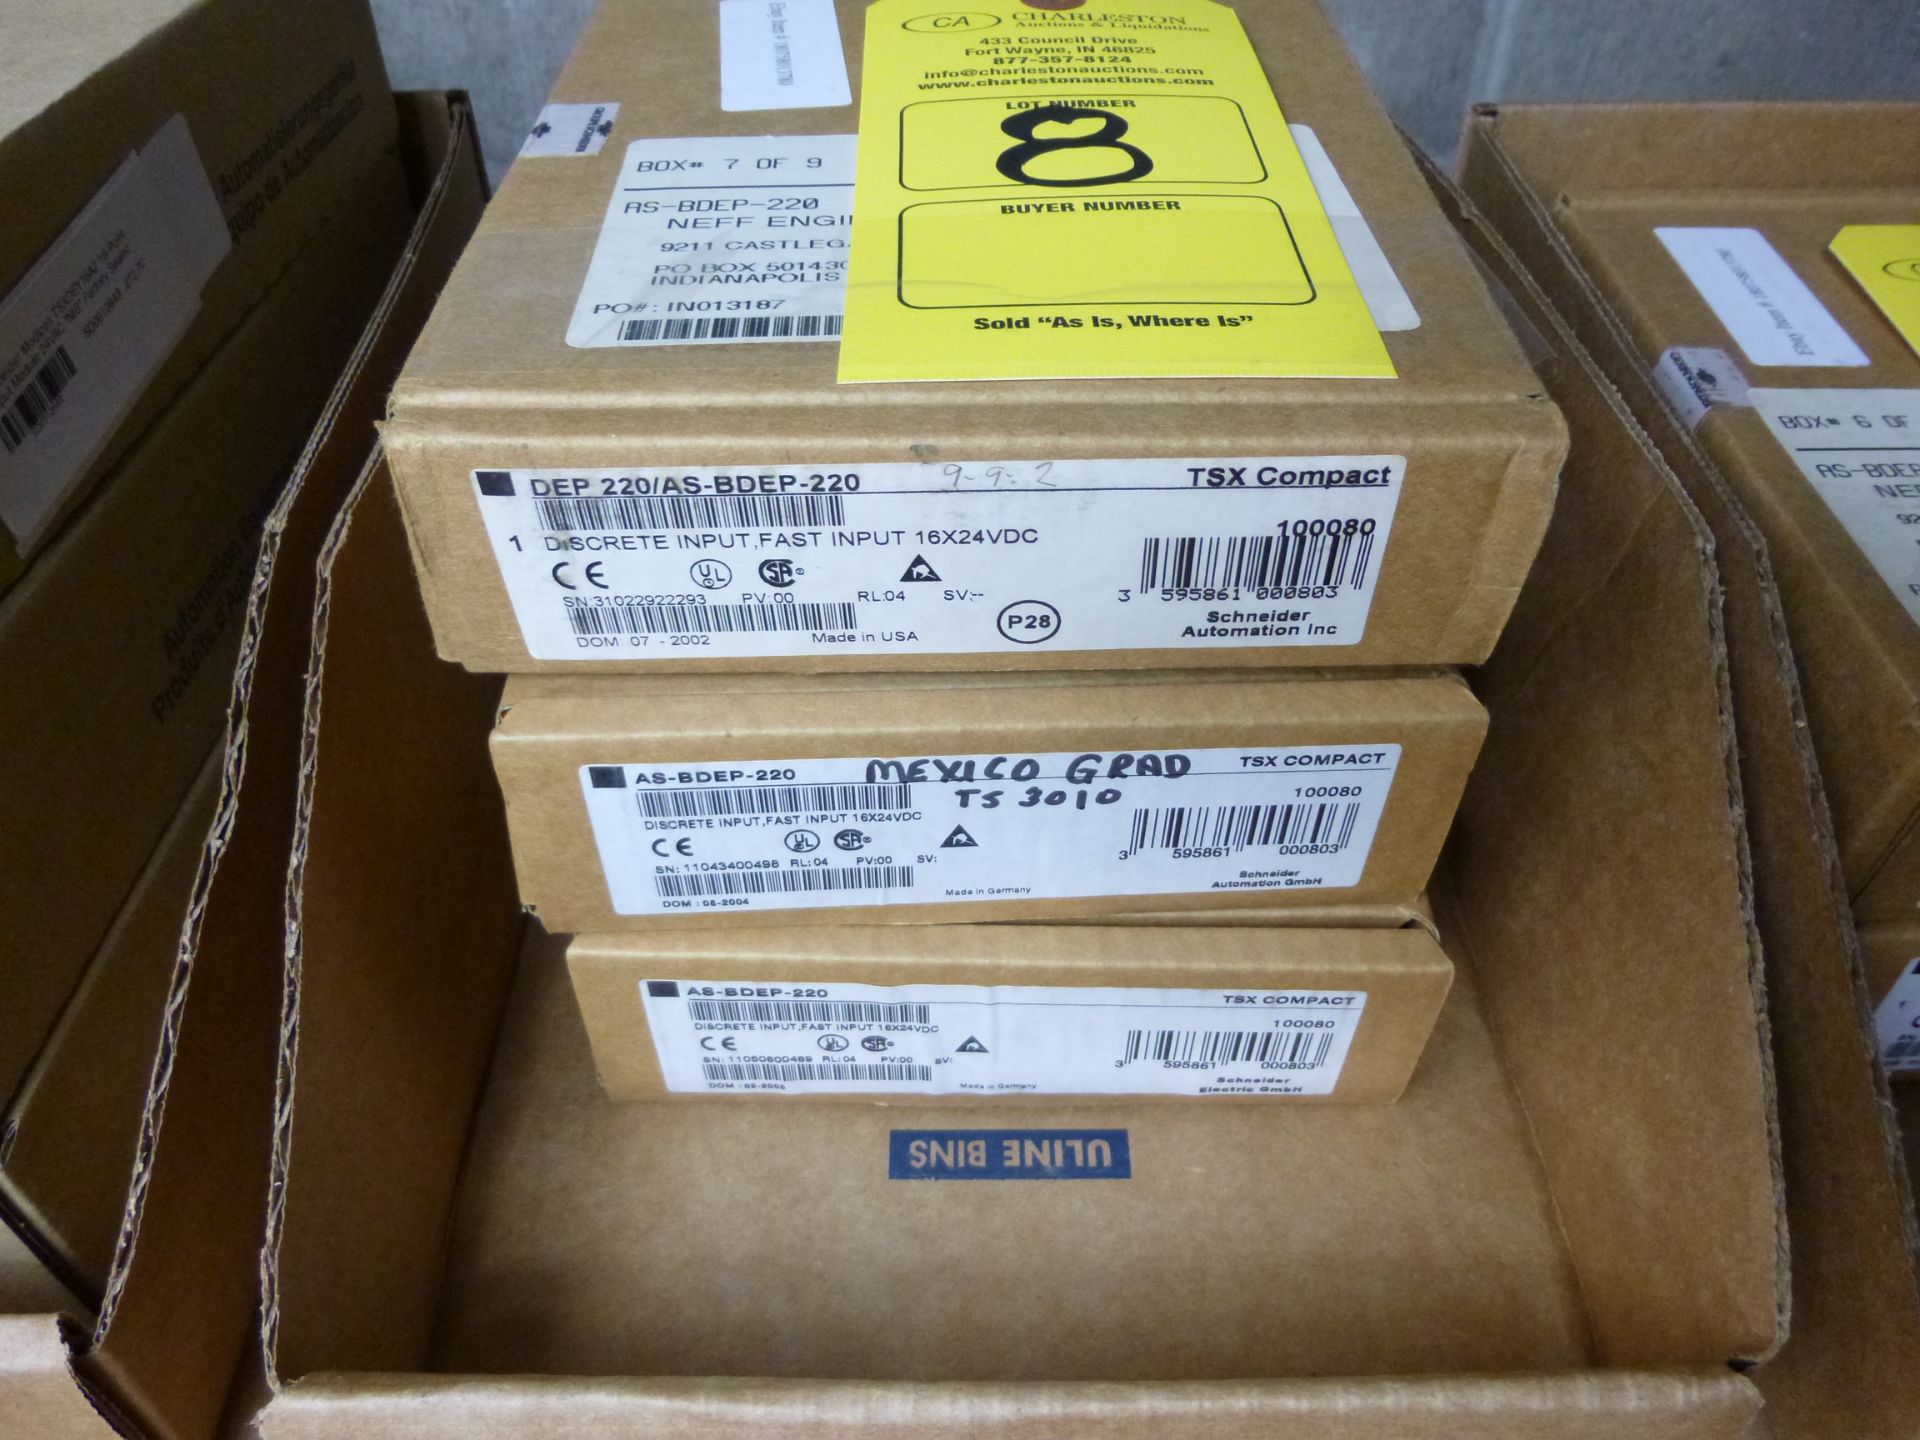 (Qty 3) Schneider Modicon DEP220/AS-BDEP-220 (new in box) Shipping can be prepared for either ground